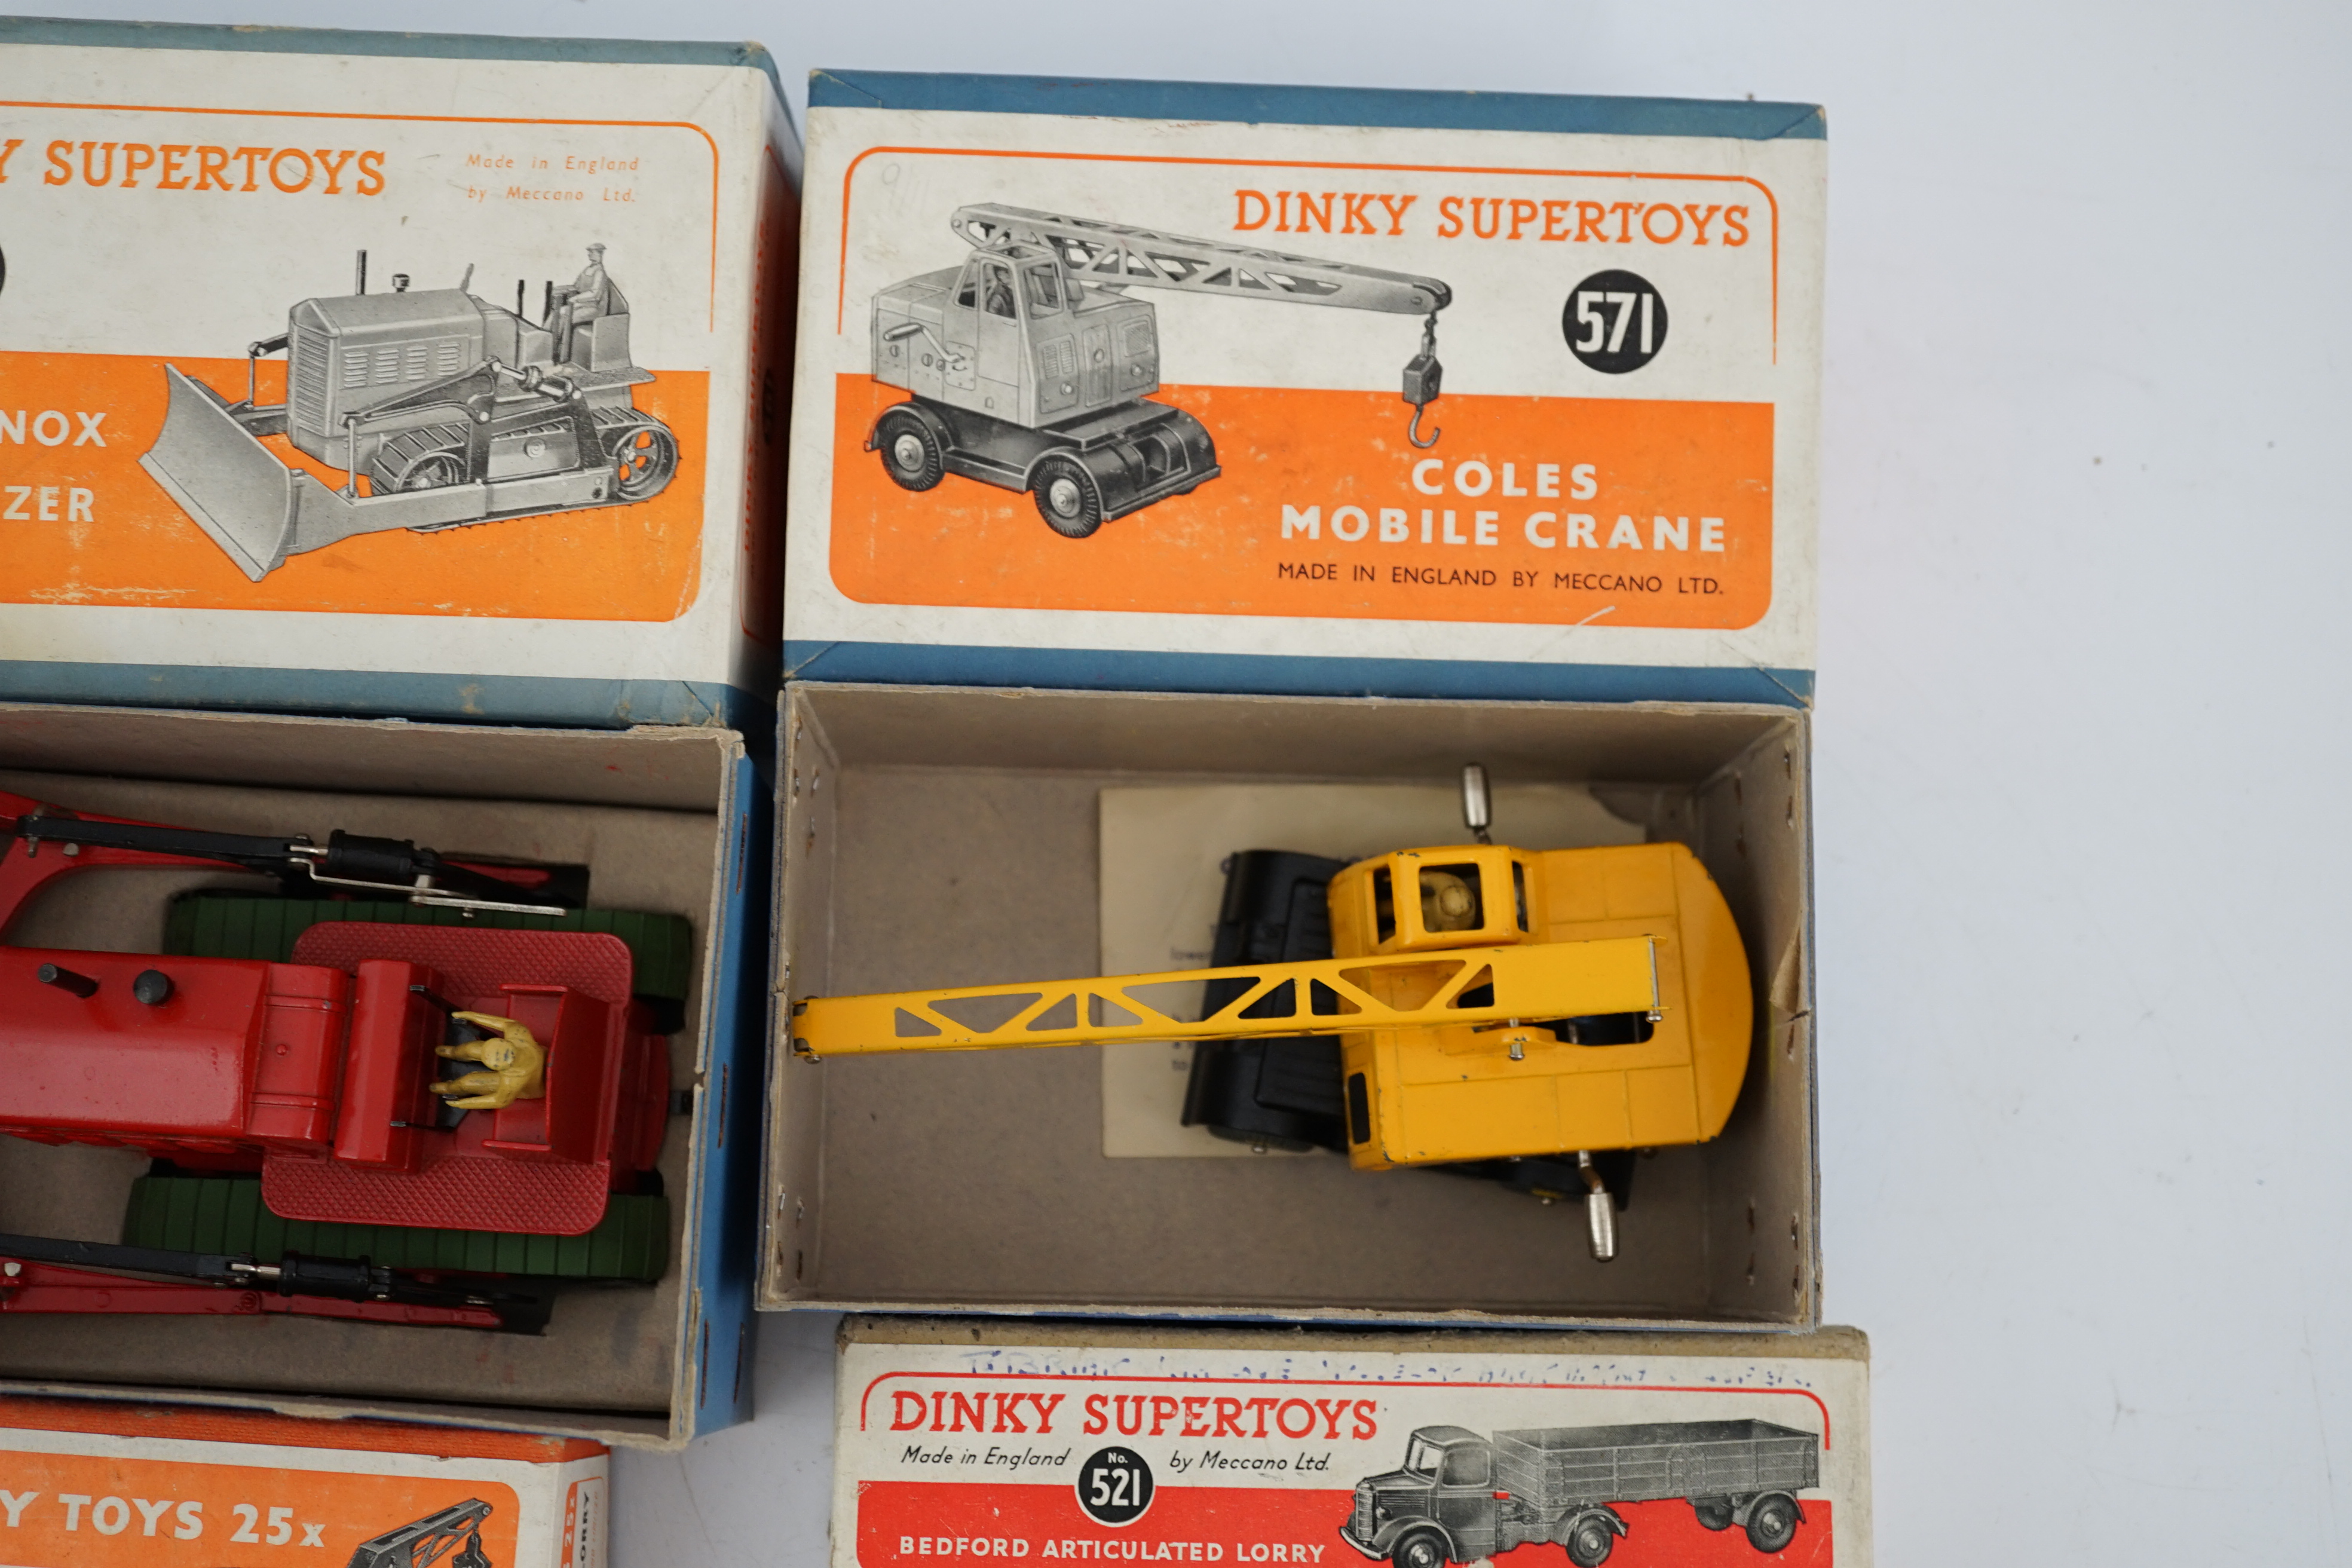 Five boxed Dinky Supertoys and Dinky Toys; a Breakdown Lorry (25x) dark grey with dark blue back, a Bedford Articulated Lorry (521) in yellow, a Blaw Knox Bulldozer (561) In red with green rubber tracks, a Dumper Truck (